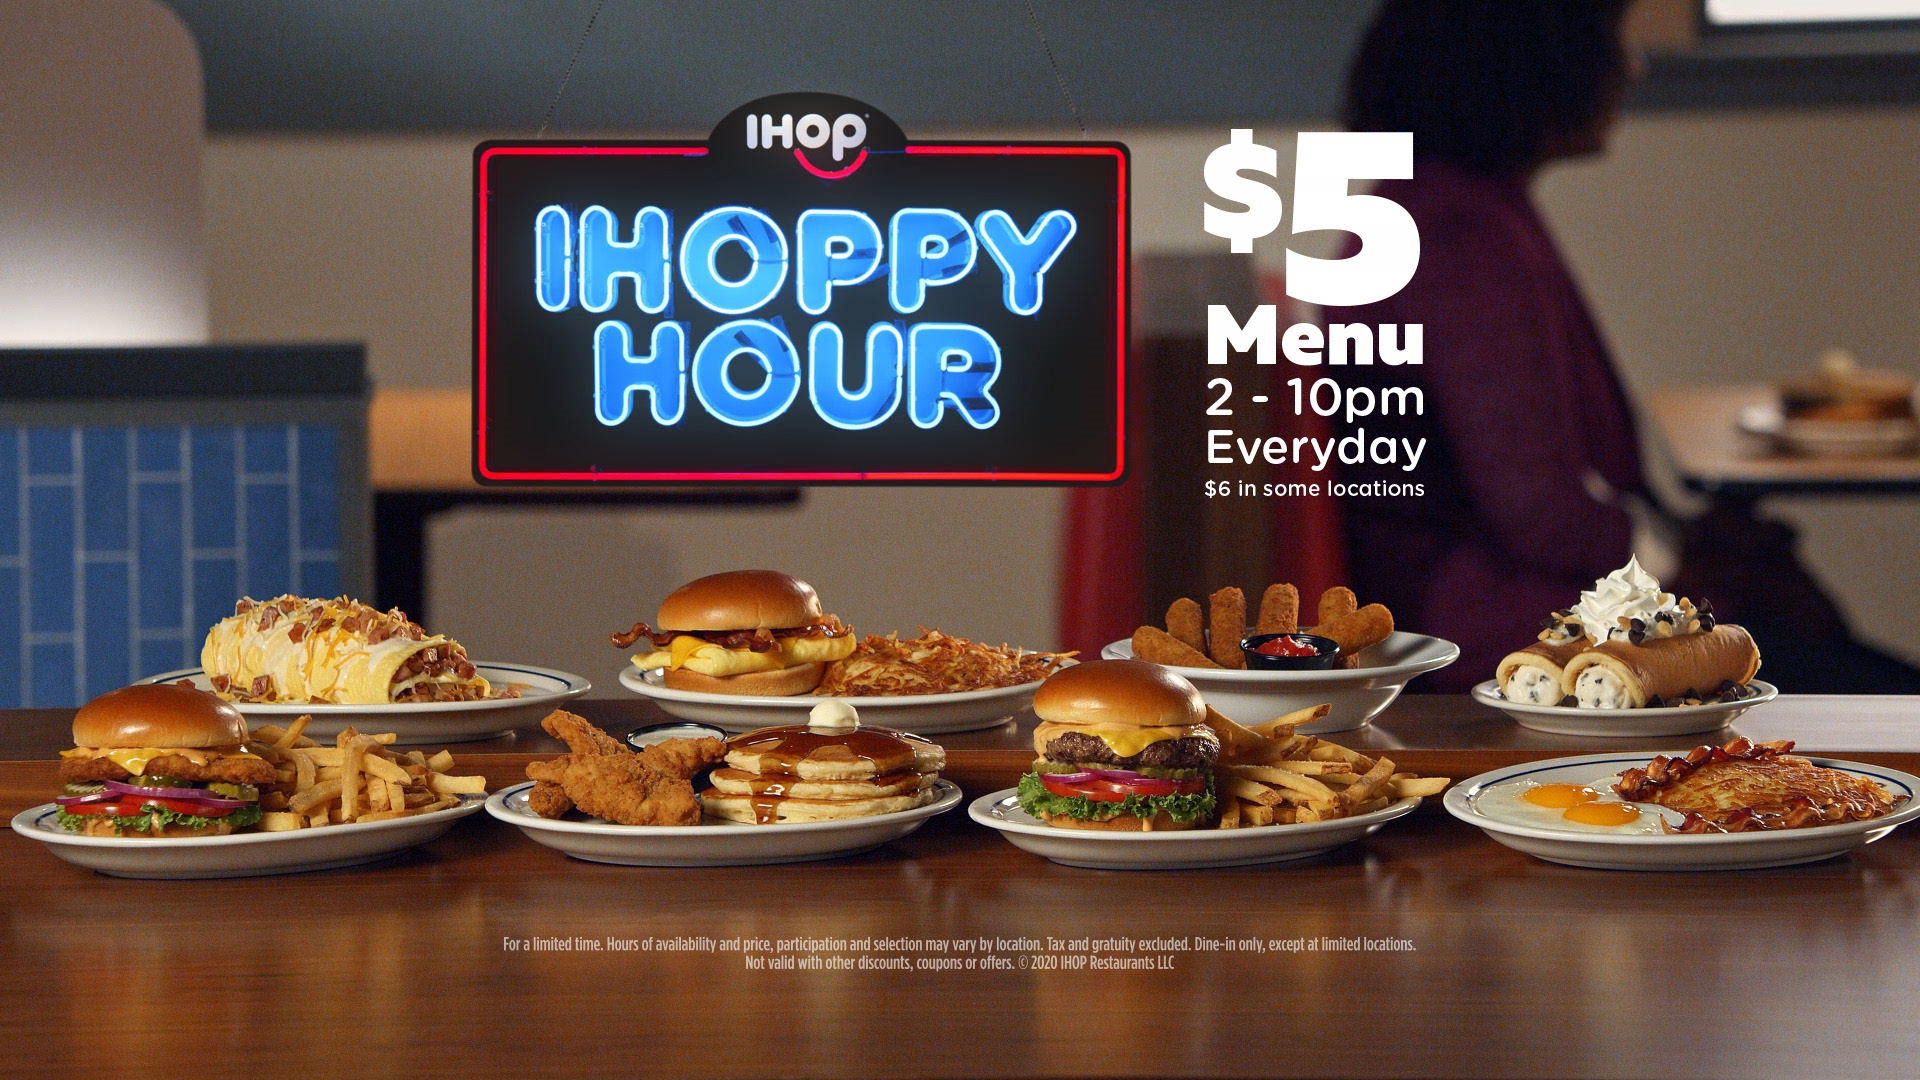 What Time Does Ihop Open? 